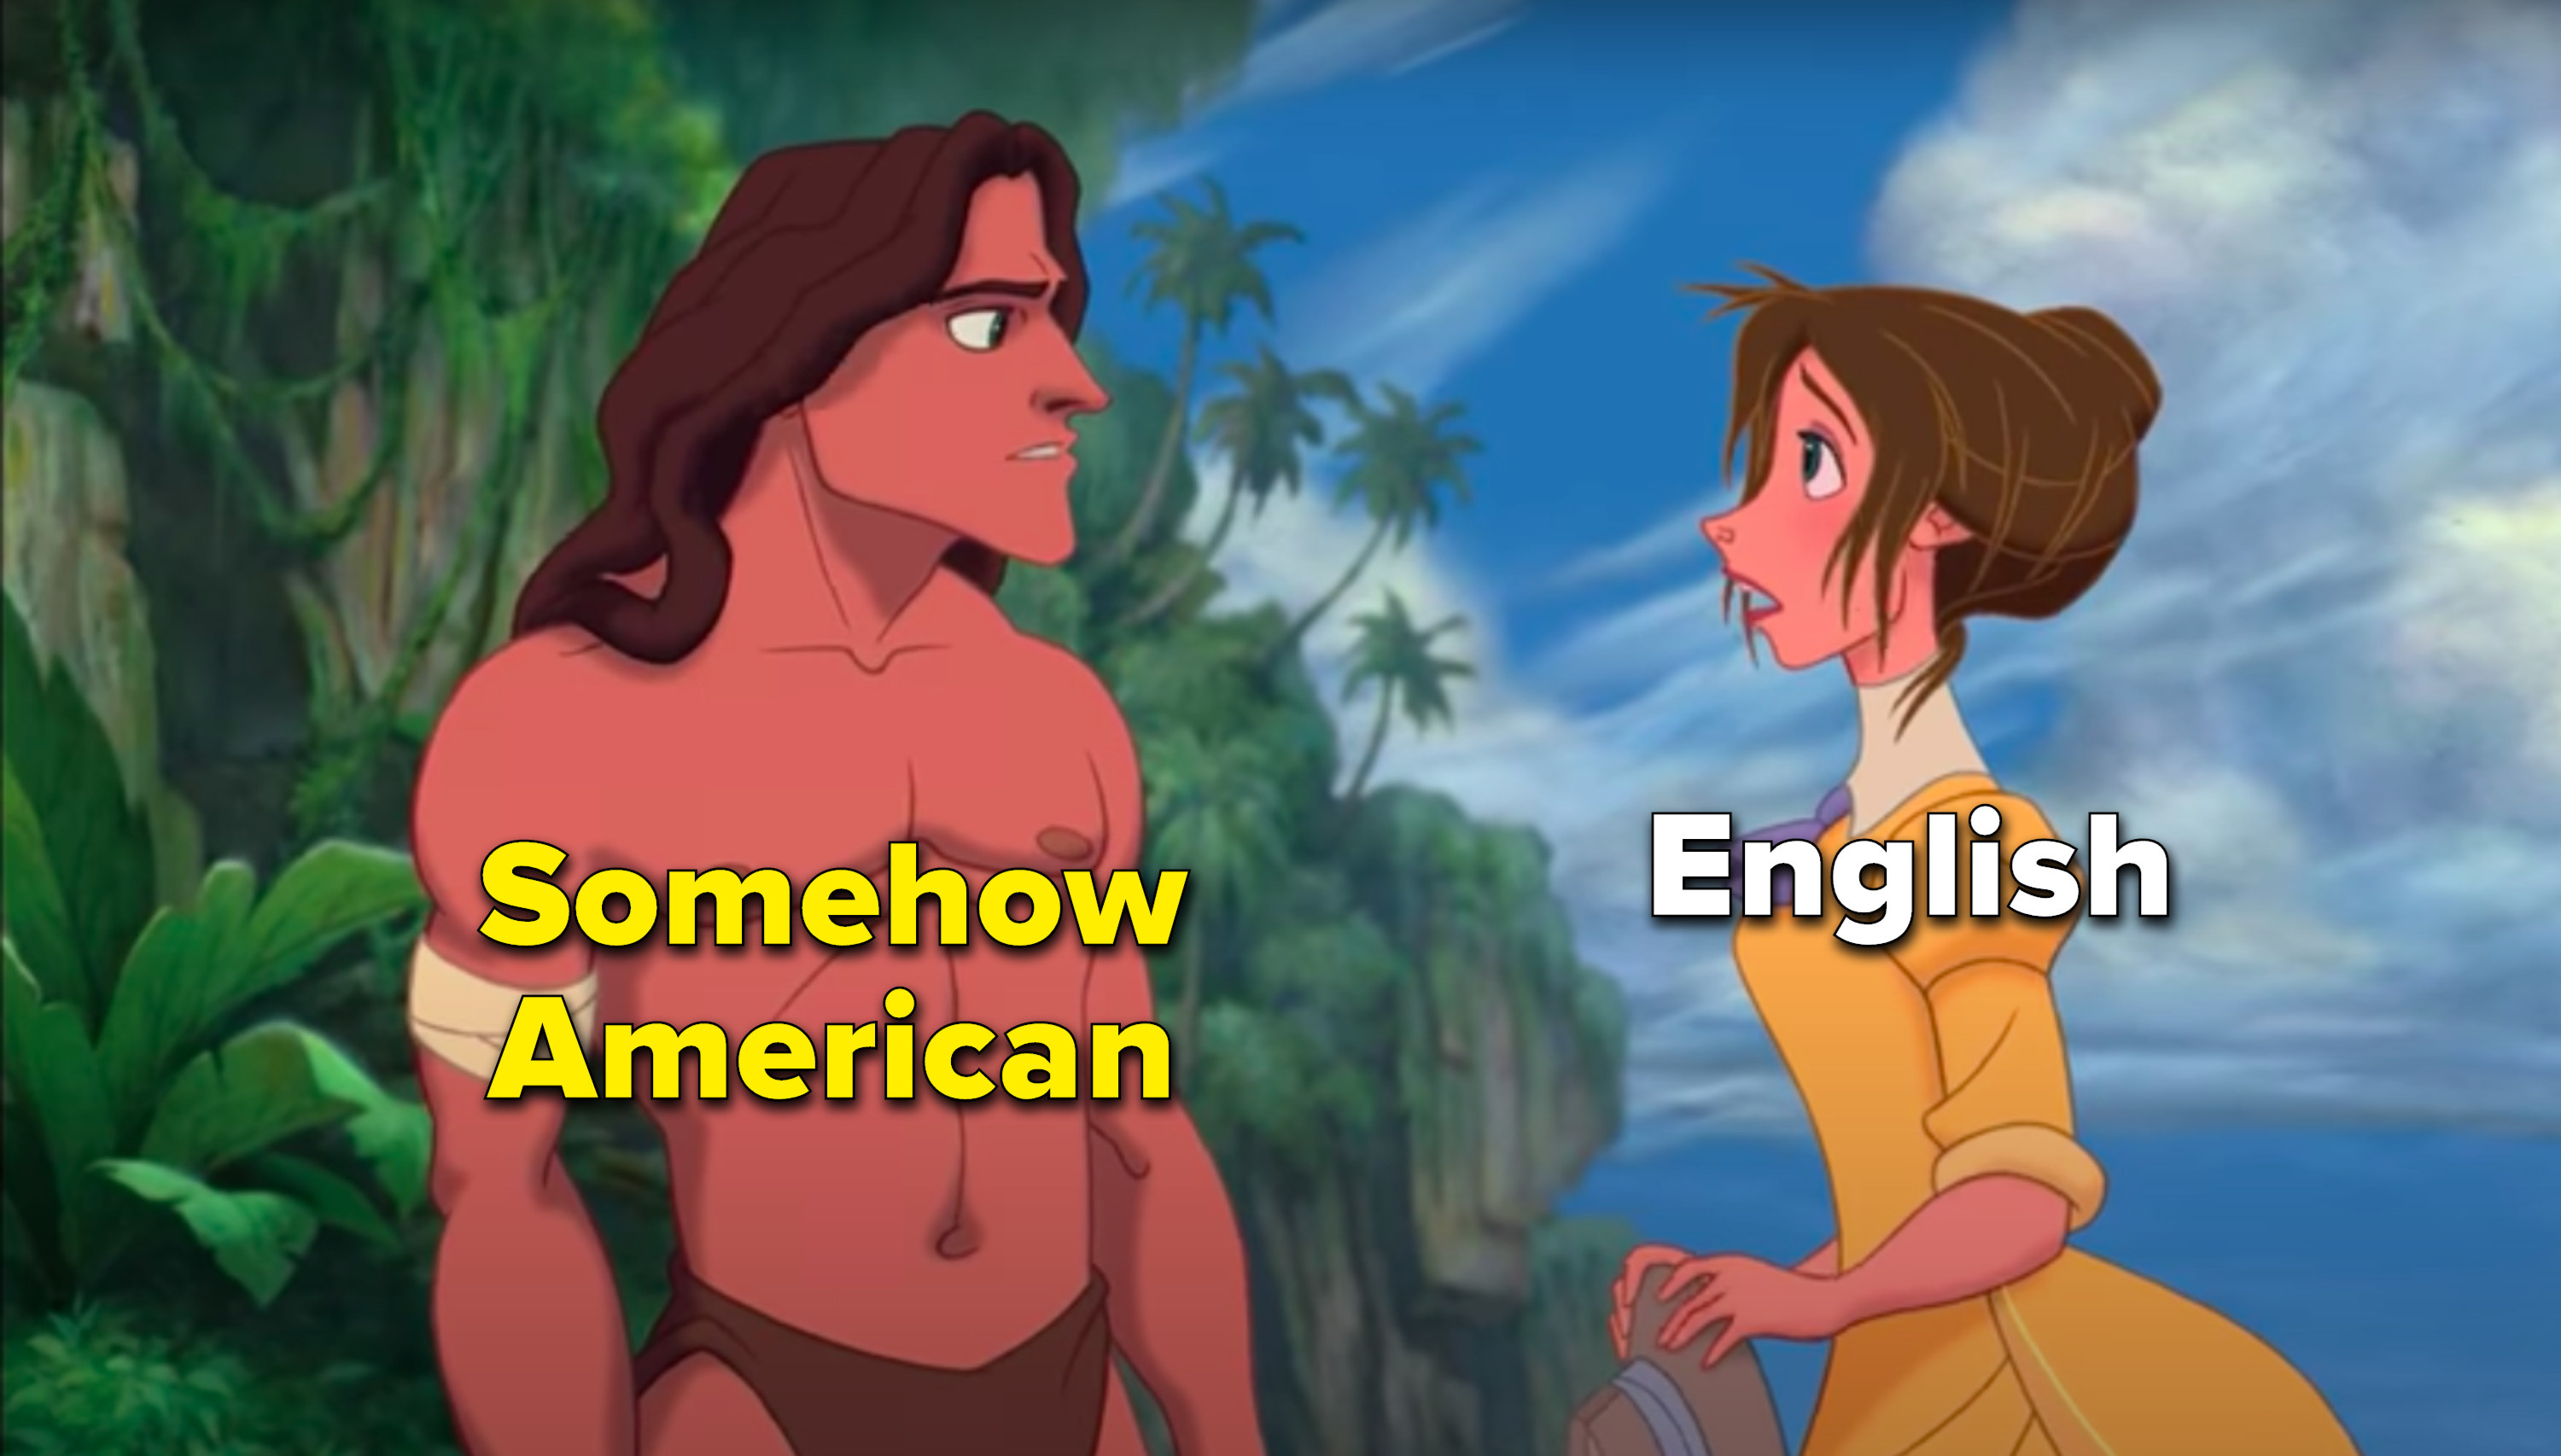 Tarzan is somehow American and Jane is English